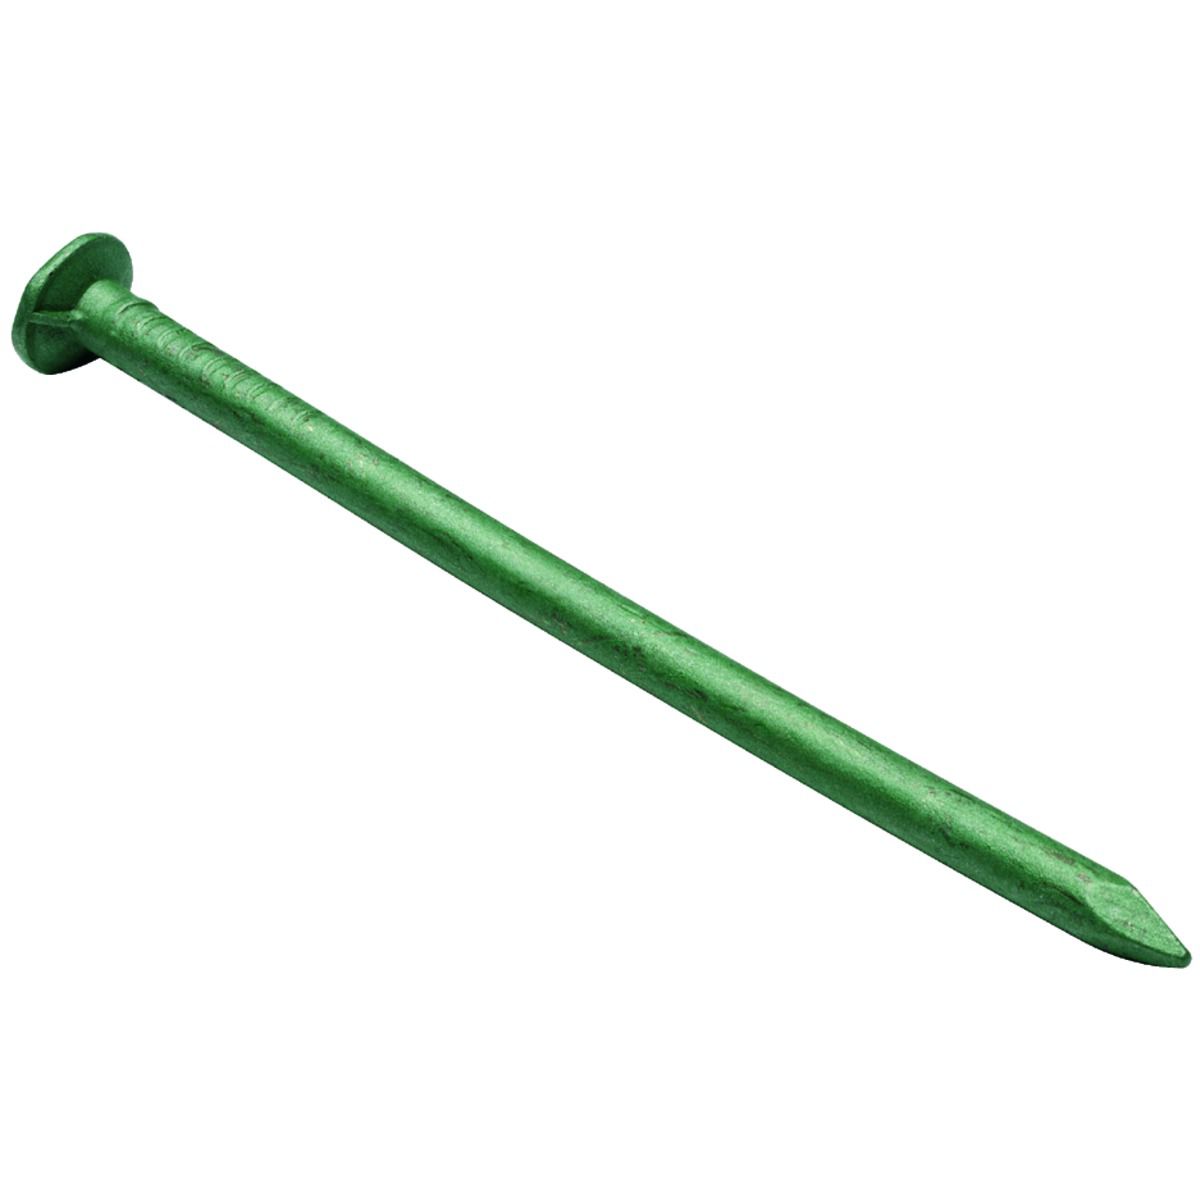 Image of Wickes 65mm Exterior Nails - 250g